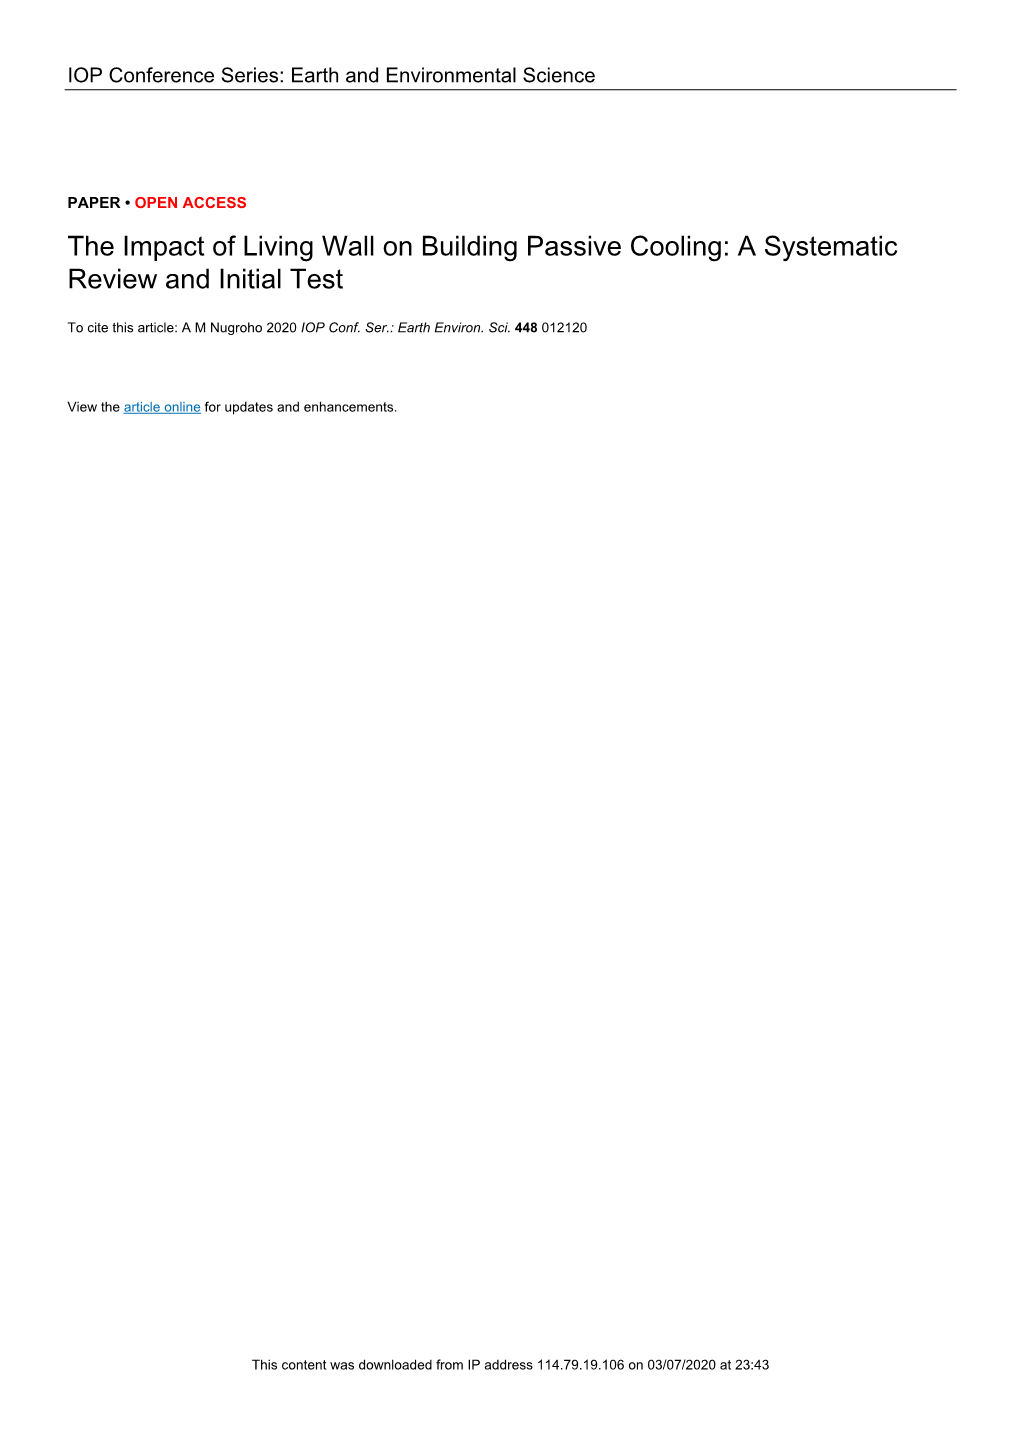 The Impact of Living Wall on Building Passive Cooling: a Systematic Review and Initial Test